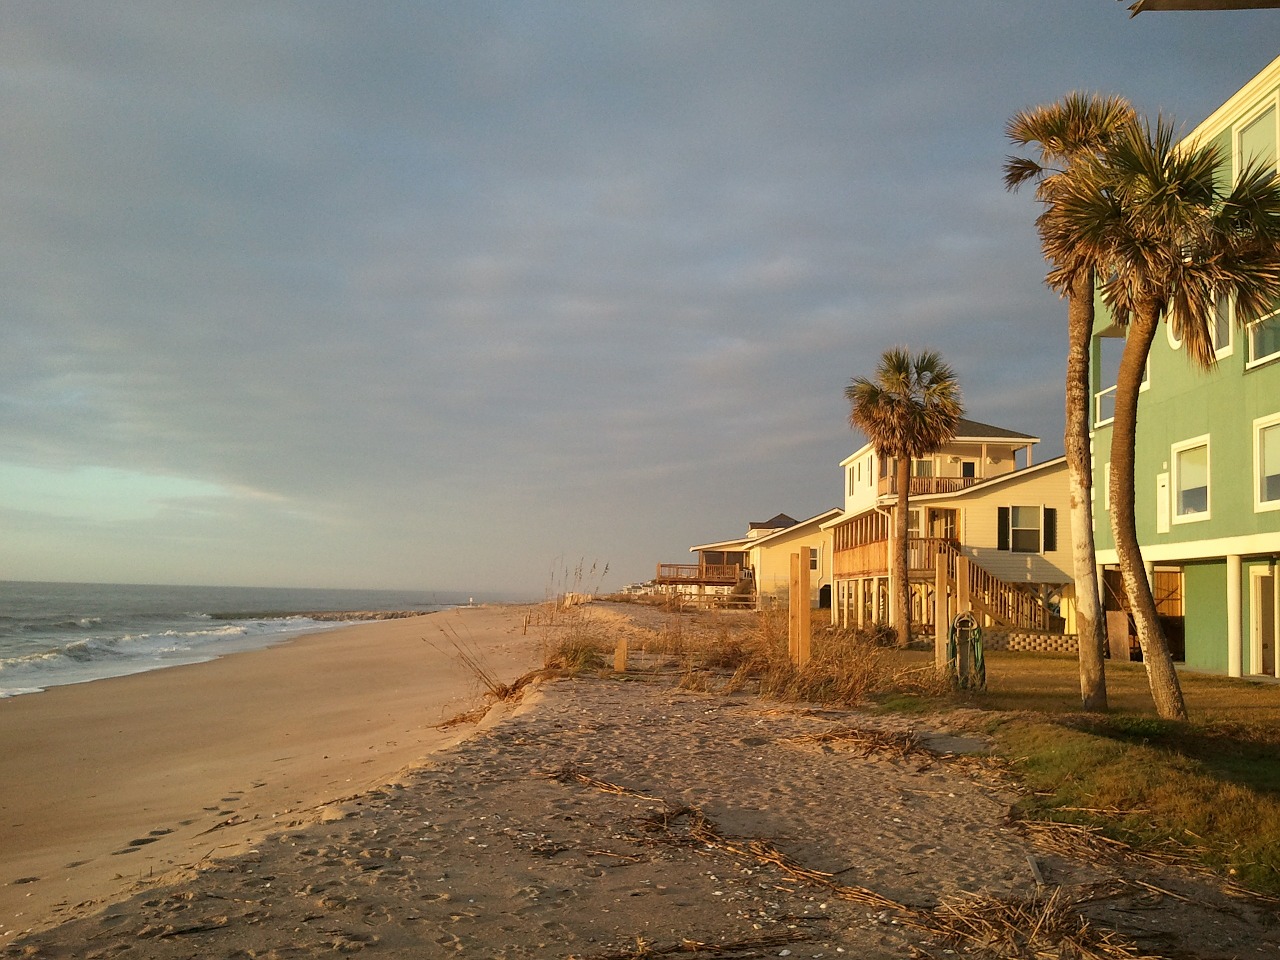 South Carolina: Reasons Why Renting a Vacation Home is Better than Staying in a Hotel